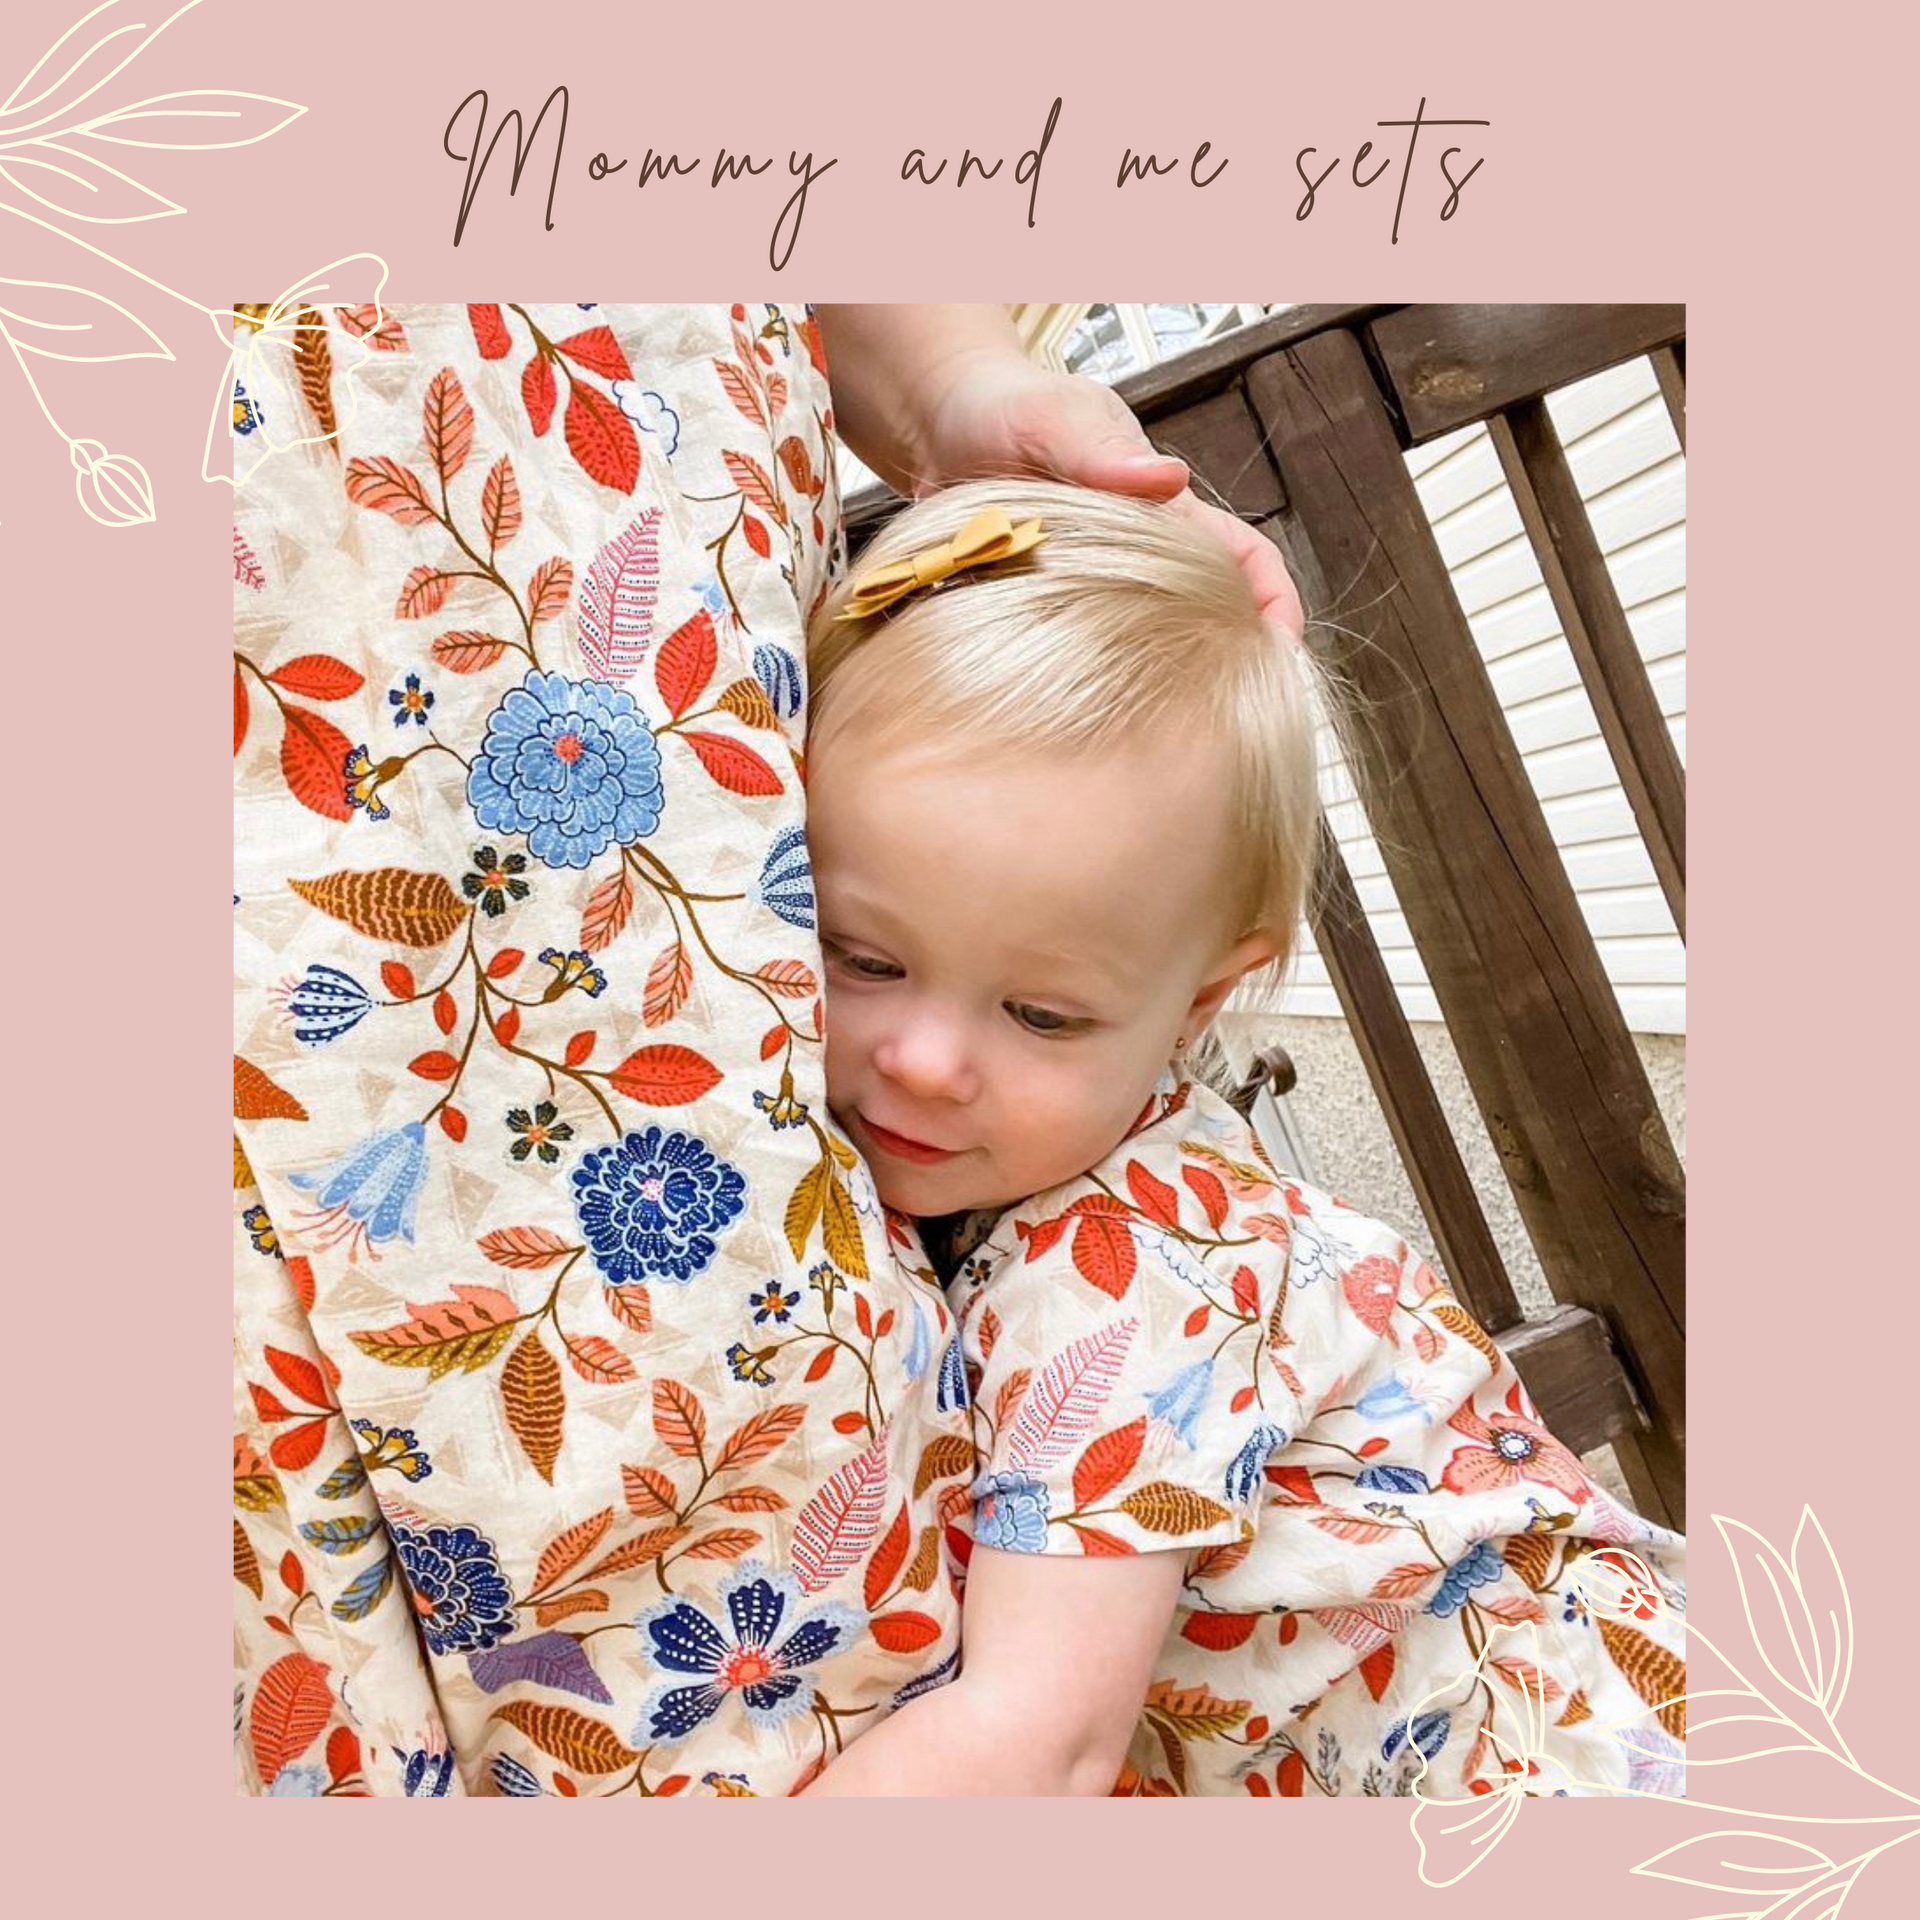 Mommy and Me- Matching Hair Accessory Sets